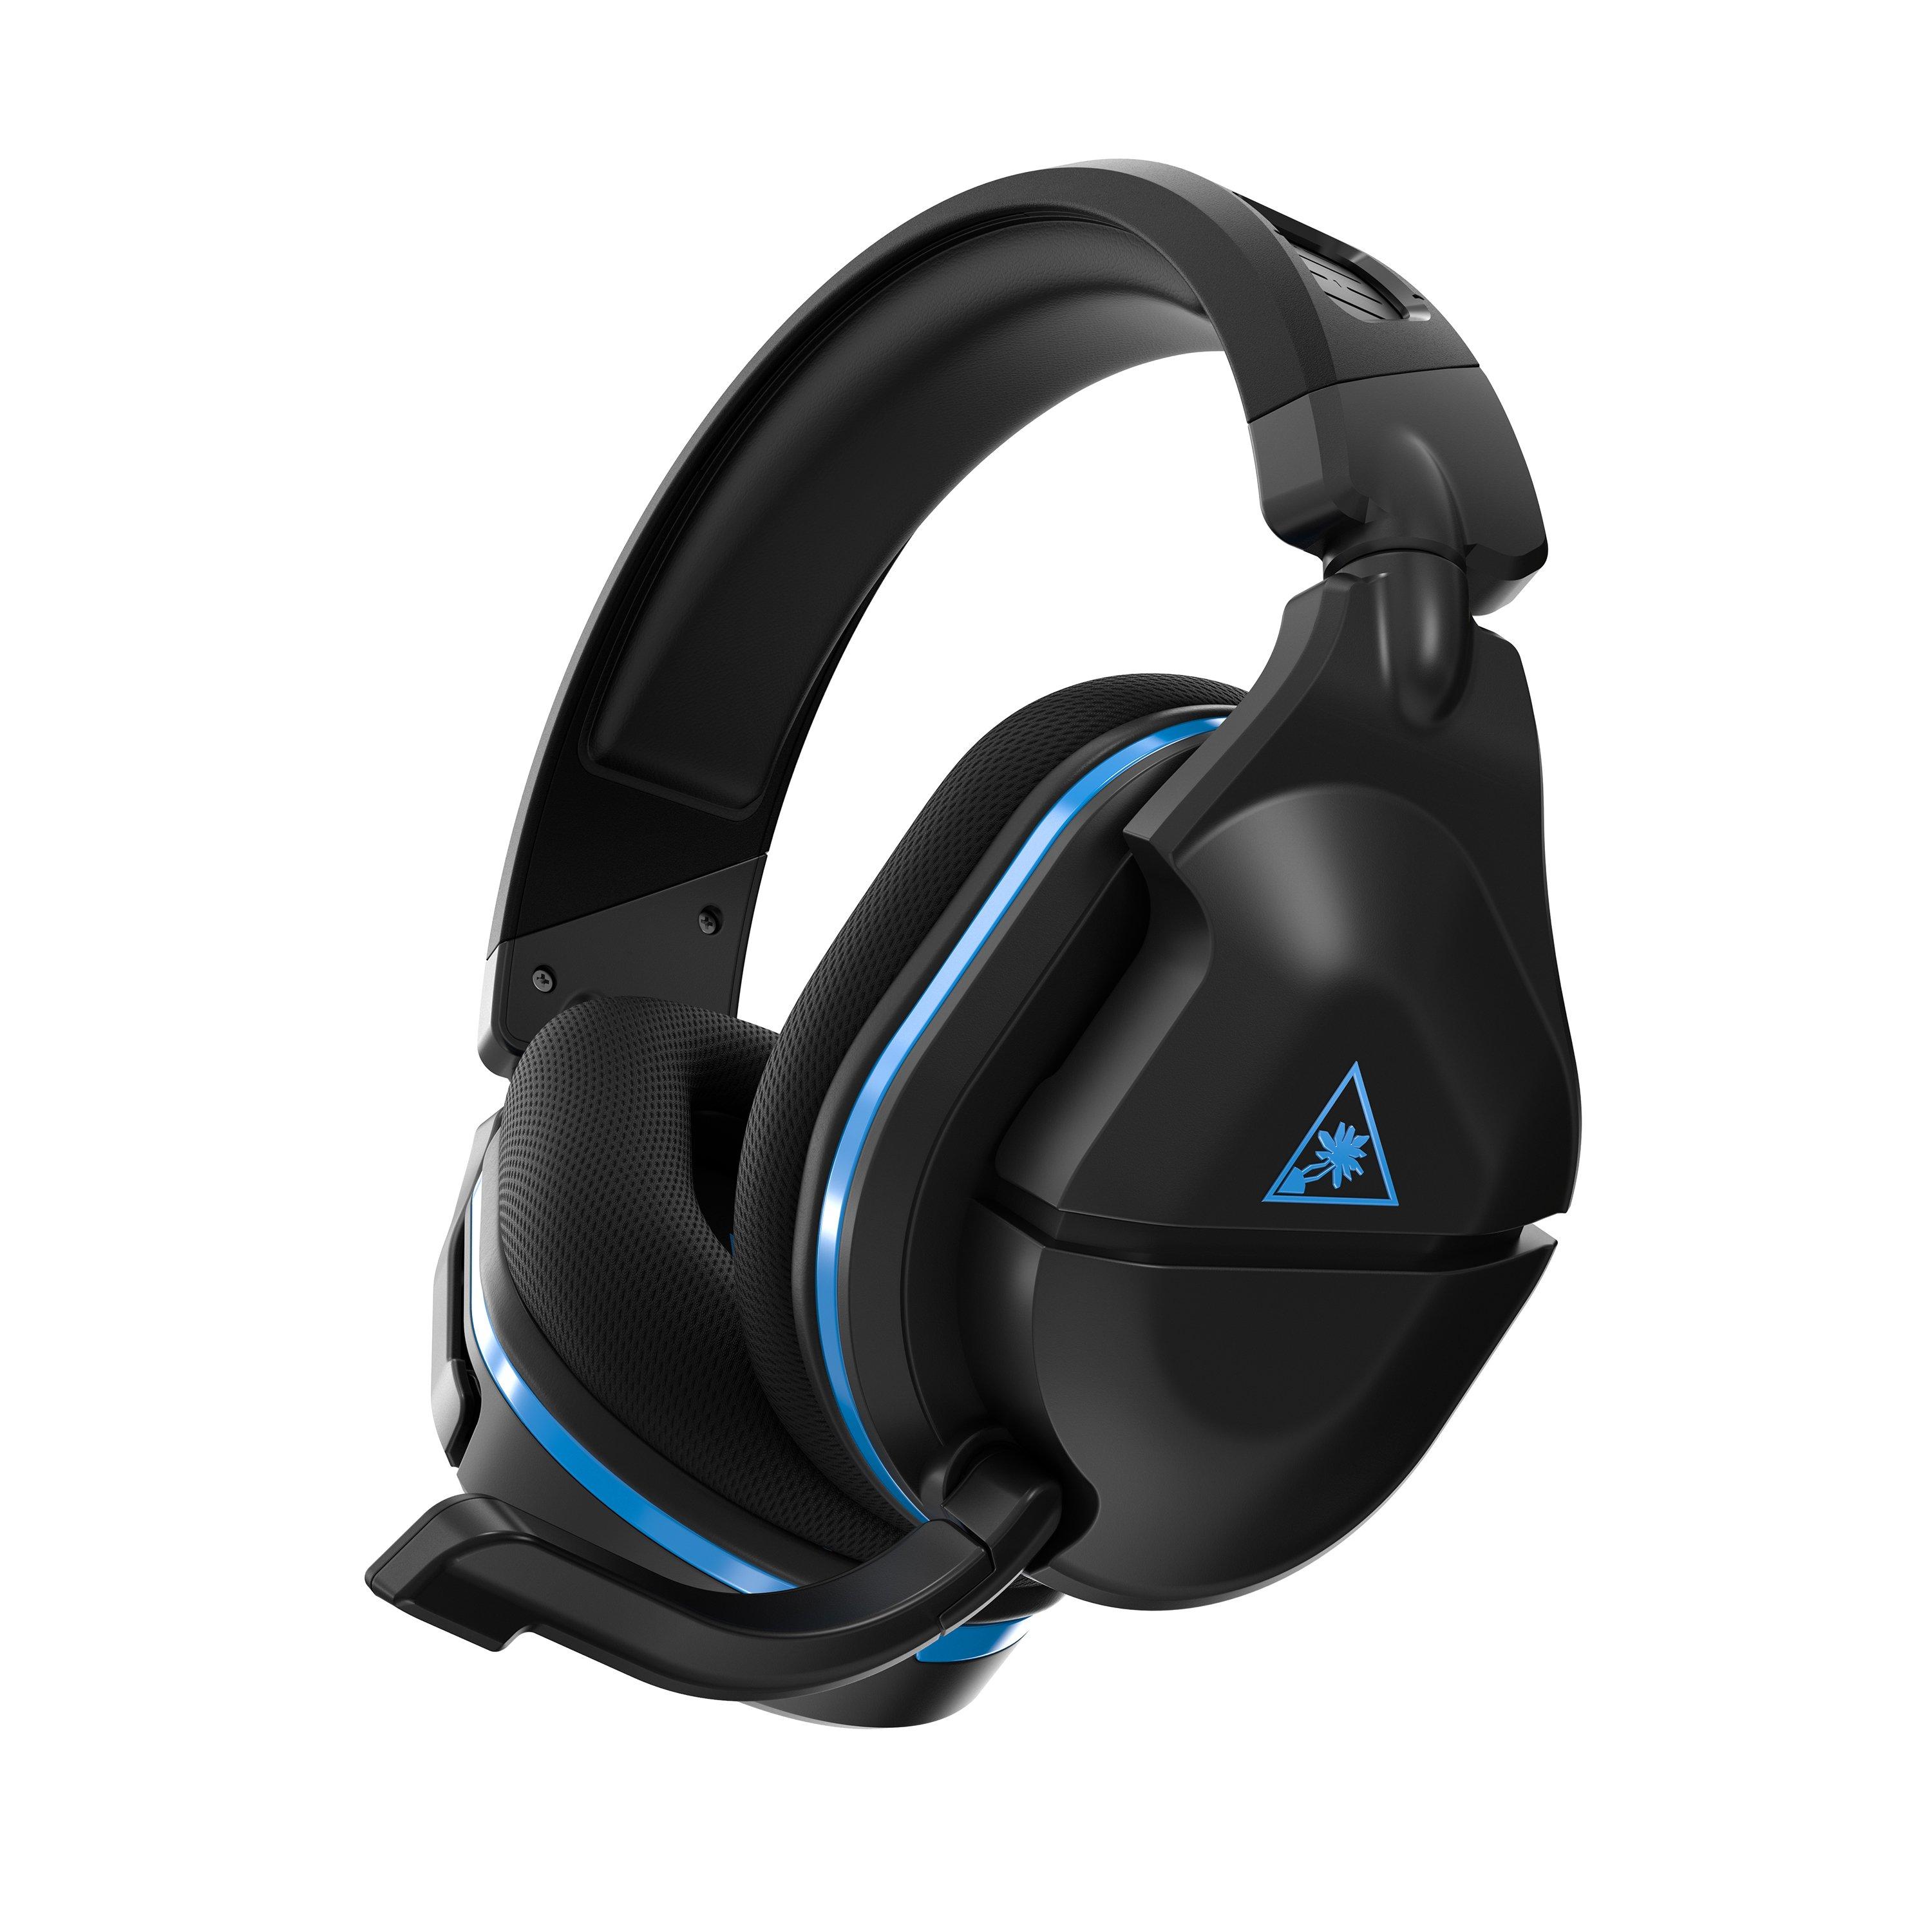 Turtle Beach Stealth 600 Gen 2 USB Gaming Headset for PlayStation - Black